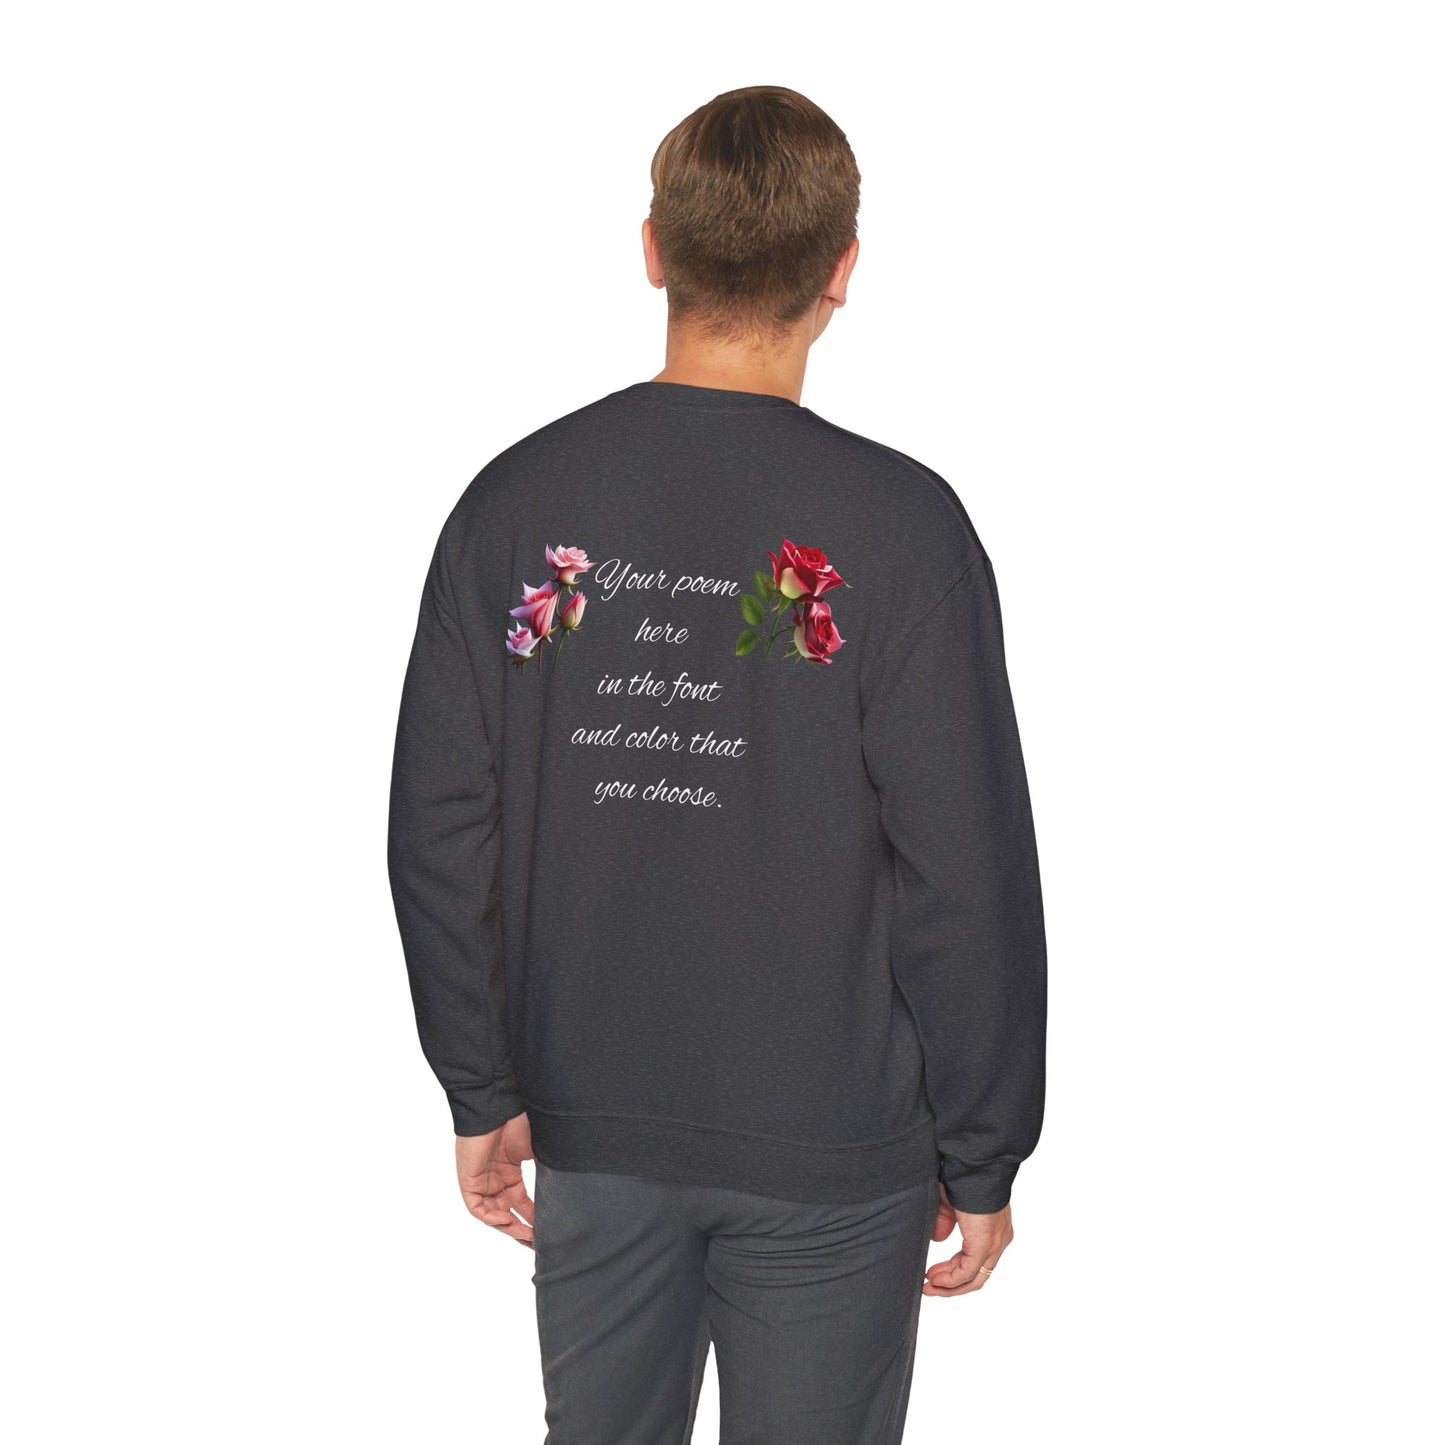 Poem On A Sweatshirt With Roses